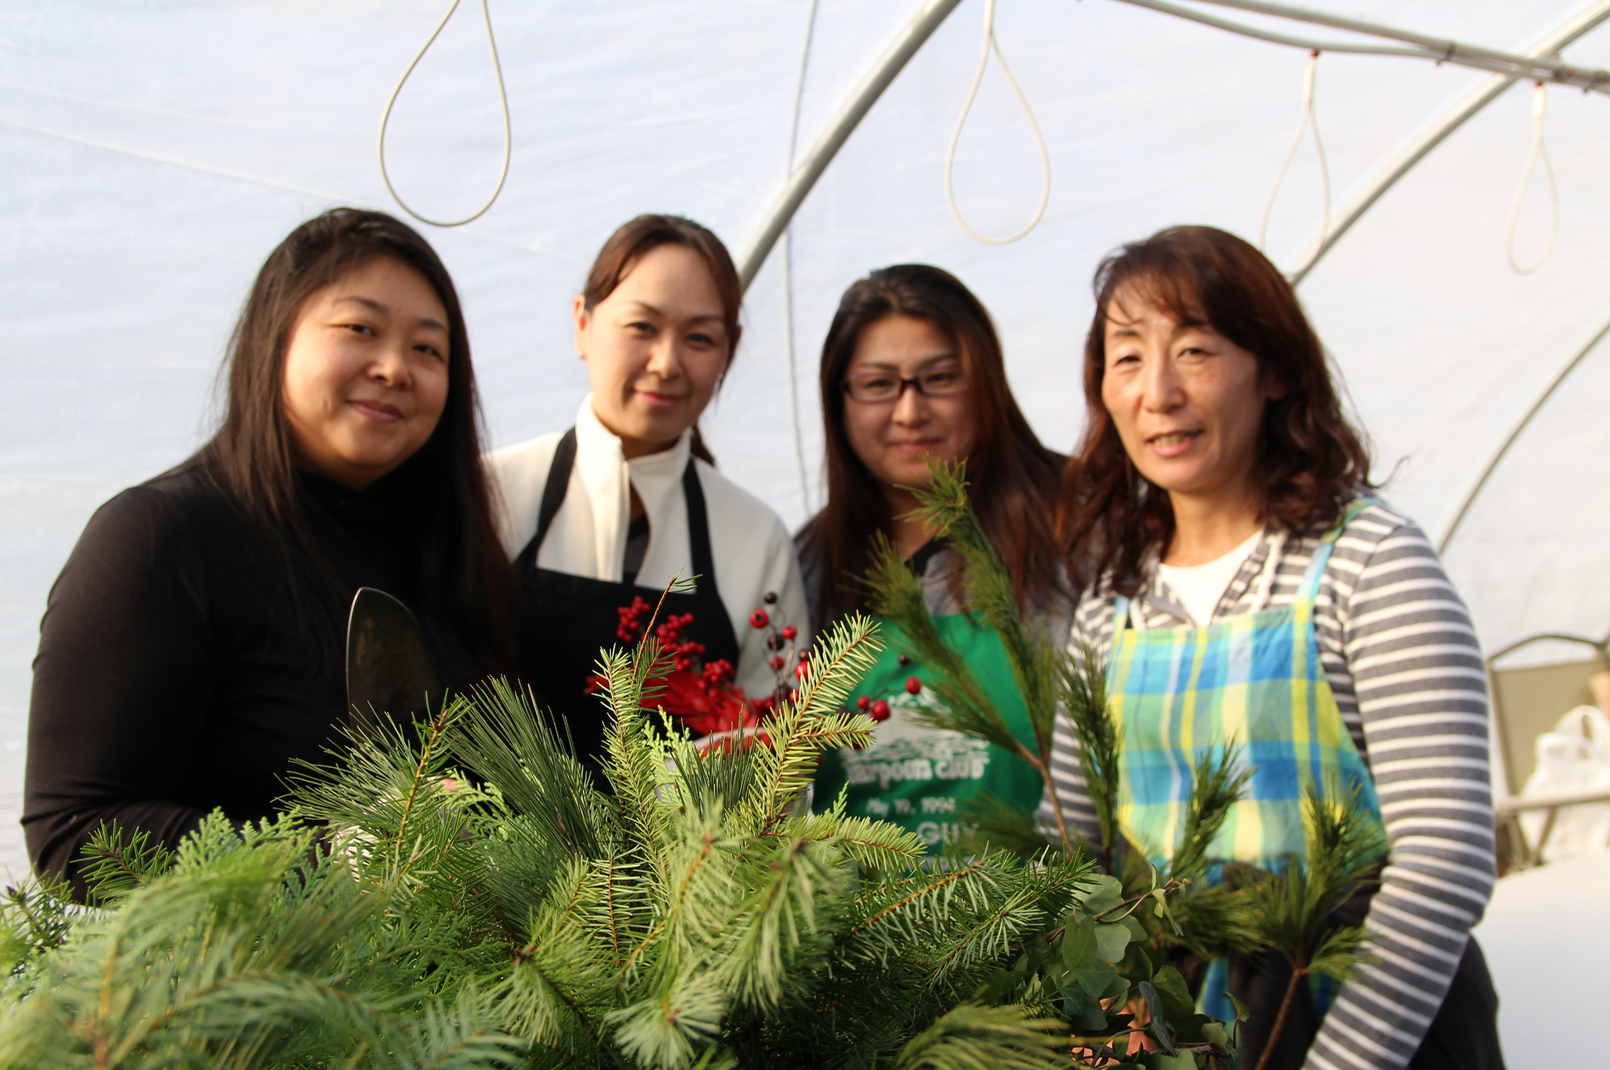 About 30 Japanese women gathered with Mary Hull and Sally Davies of Greenwich Green & Clean at Sam Bridge Nursery & Greenhouses on North Street to arrange holiday baskets of greenery. Photo: Leslie Yager